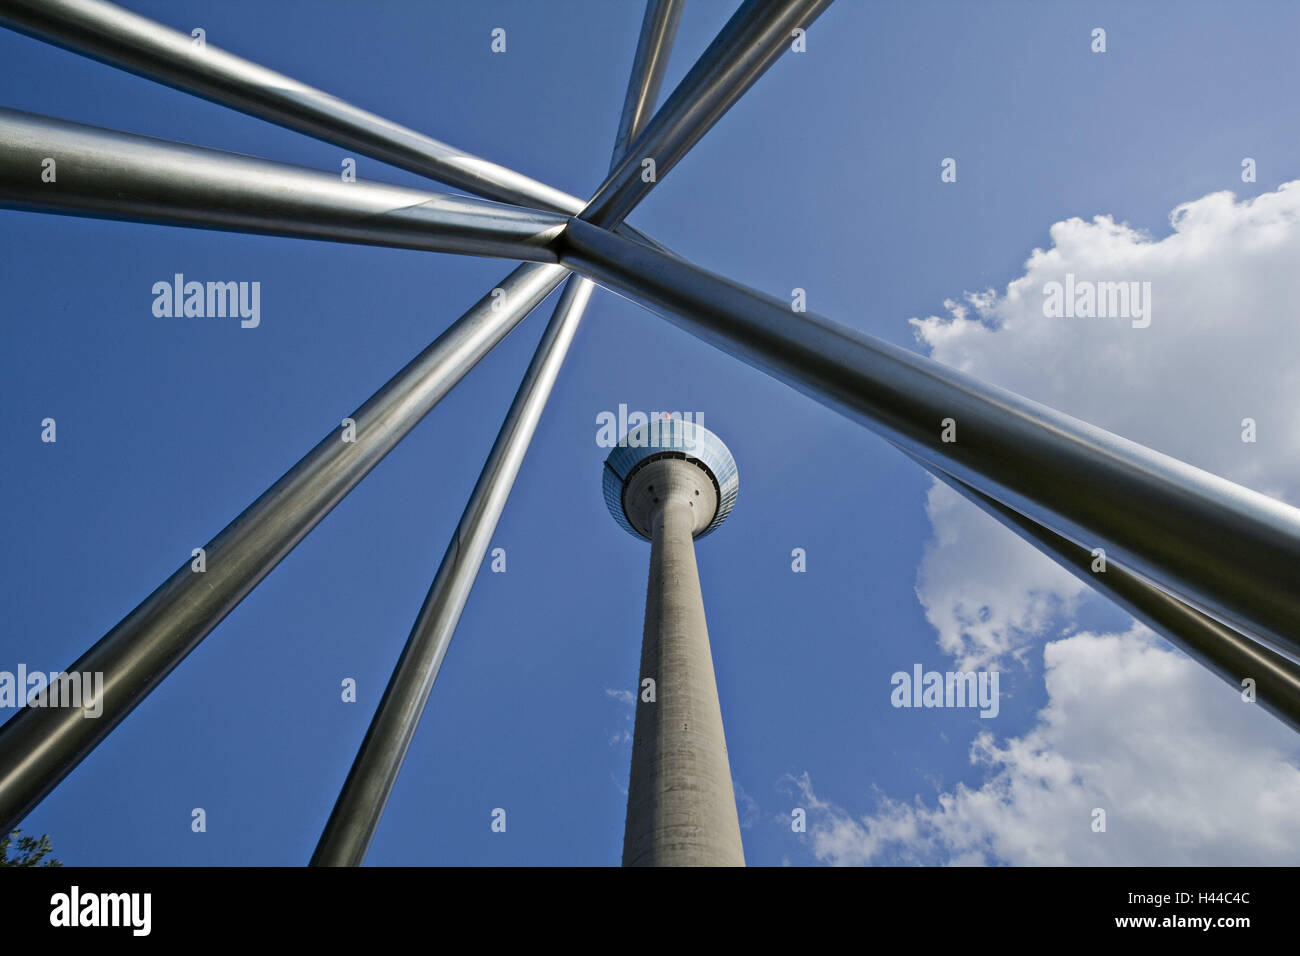 Germany, North Rhine-Westphalia, Dusseldorf, energy pyramid, television tower, town, media harbour, Rhine tower, tower, structure, architecture, sculpture, stainless steel sculpture, stainless steel, high-grade steels, place of interest, Stock Photo